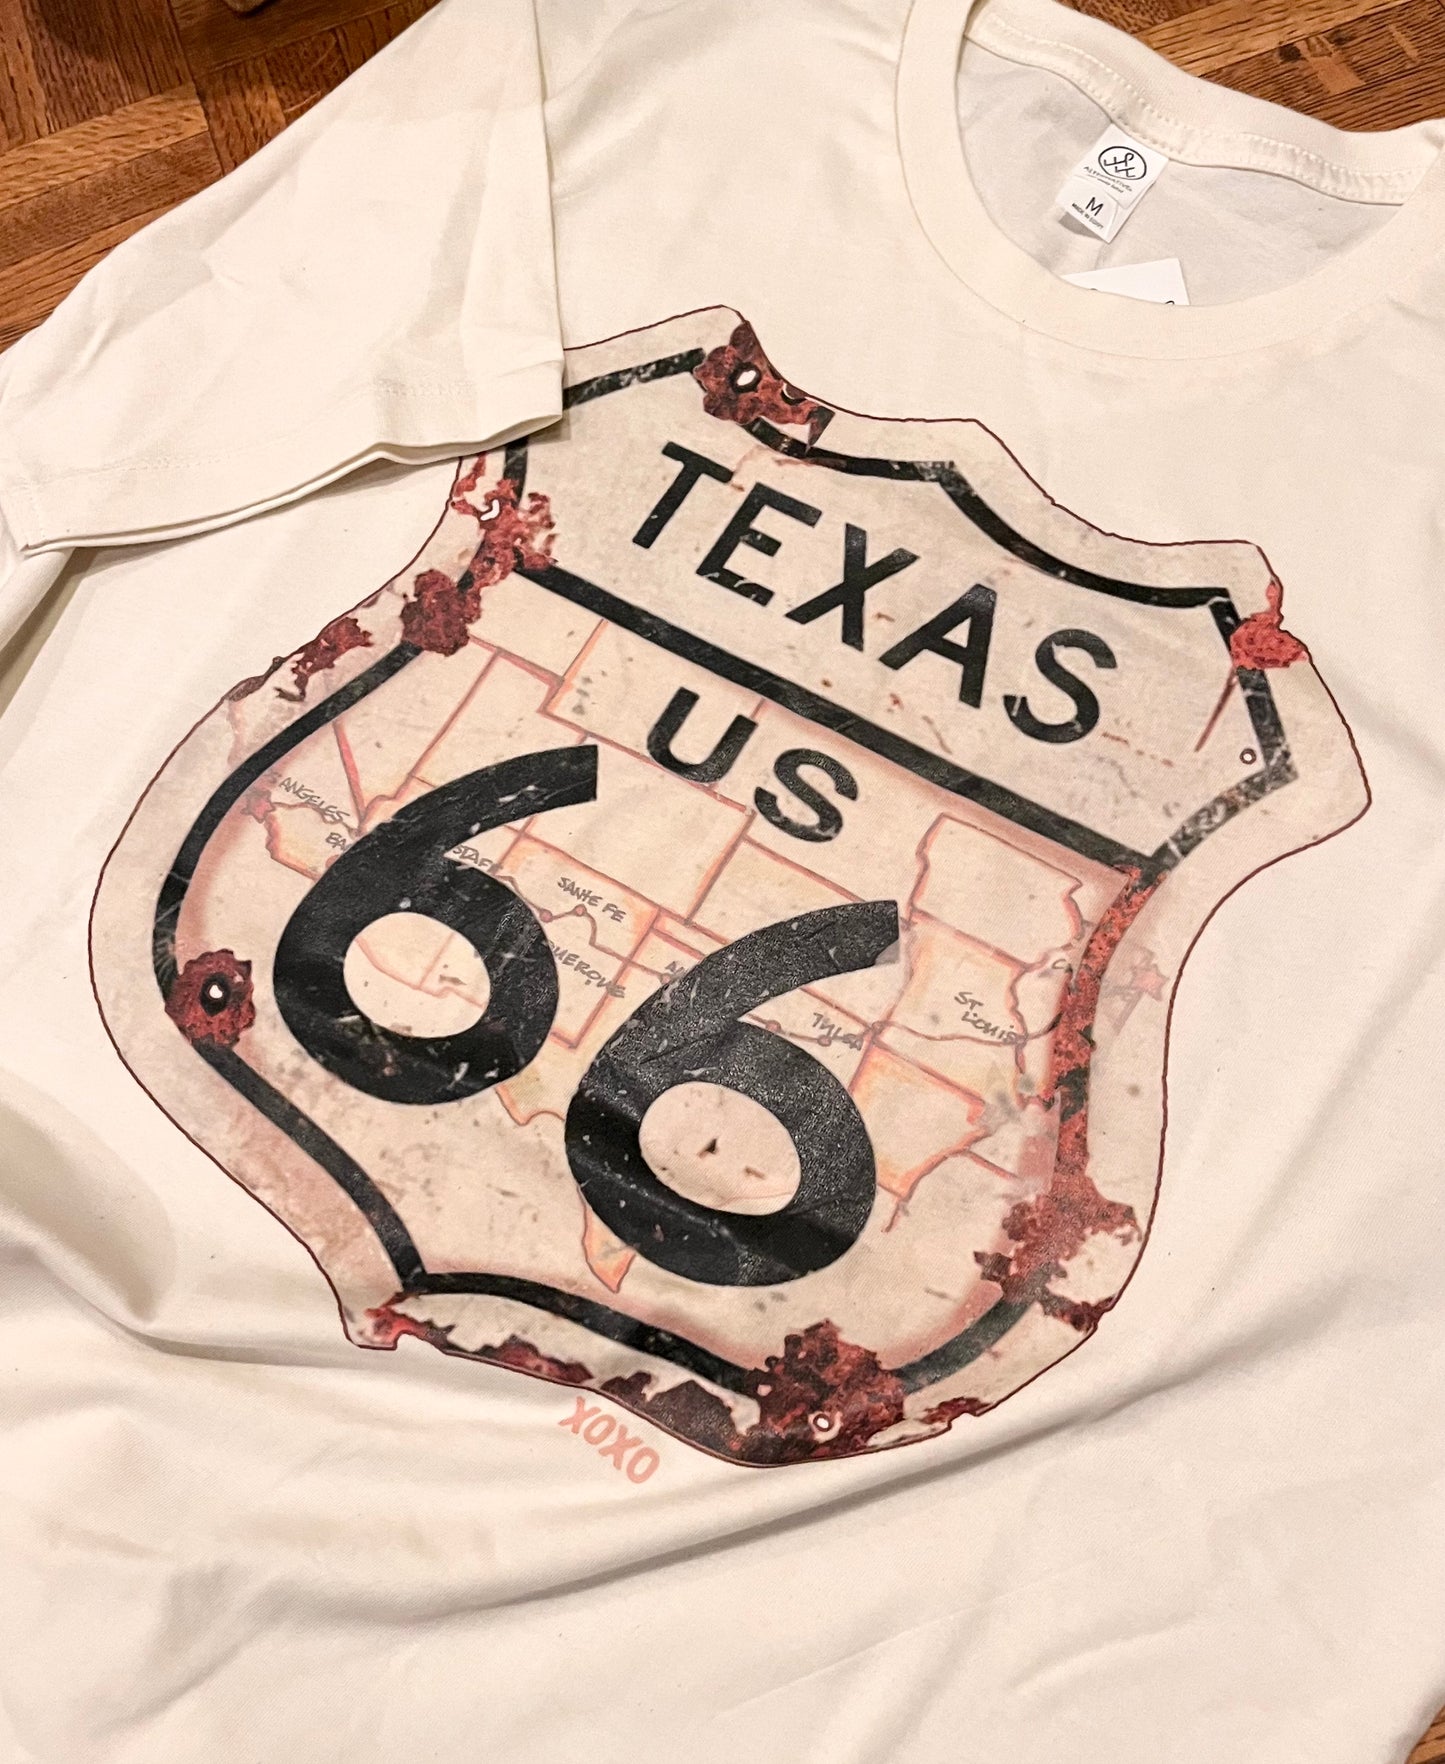 Texas Route 66 t-shirt -30% off!